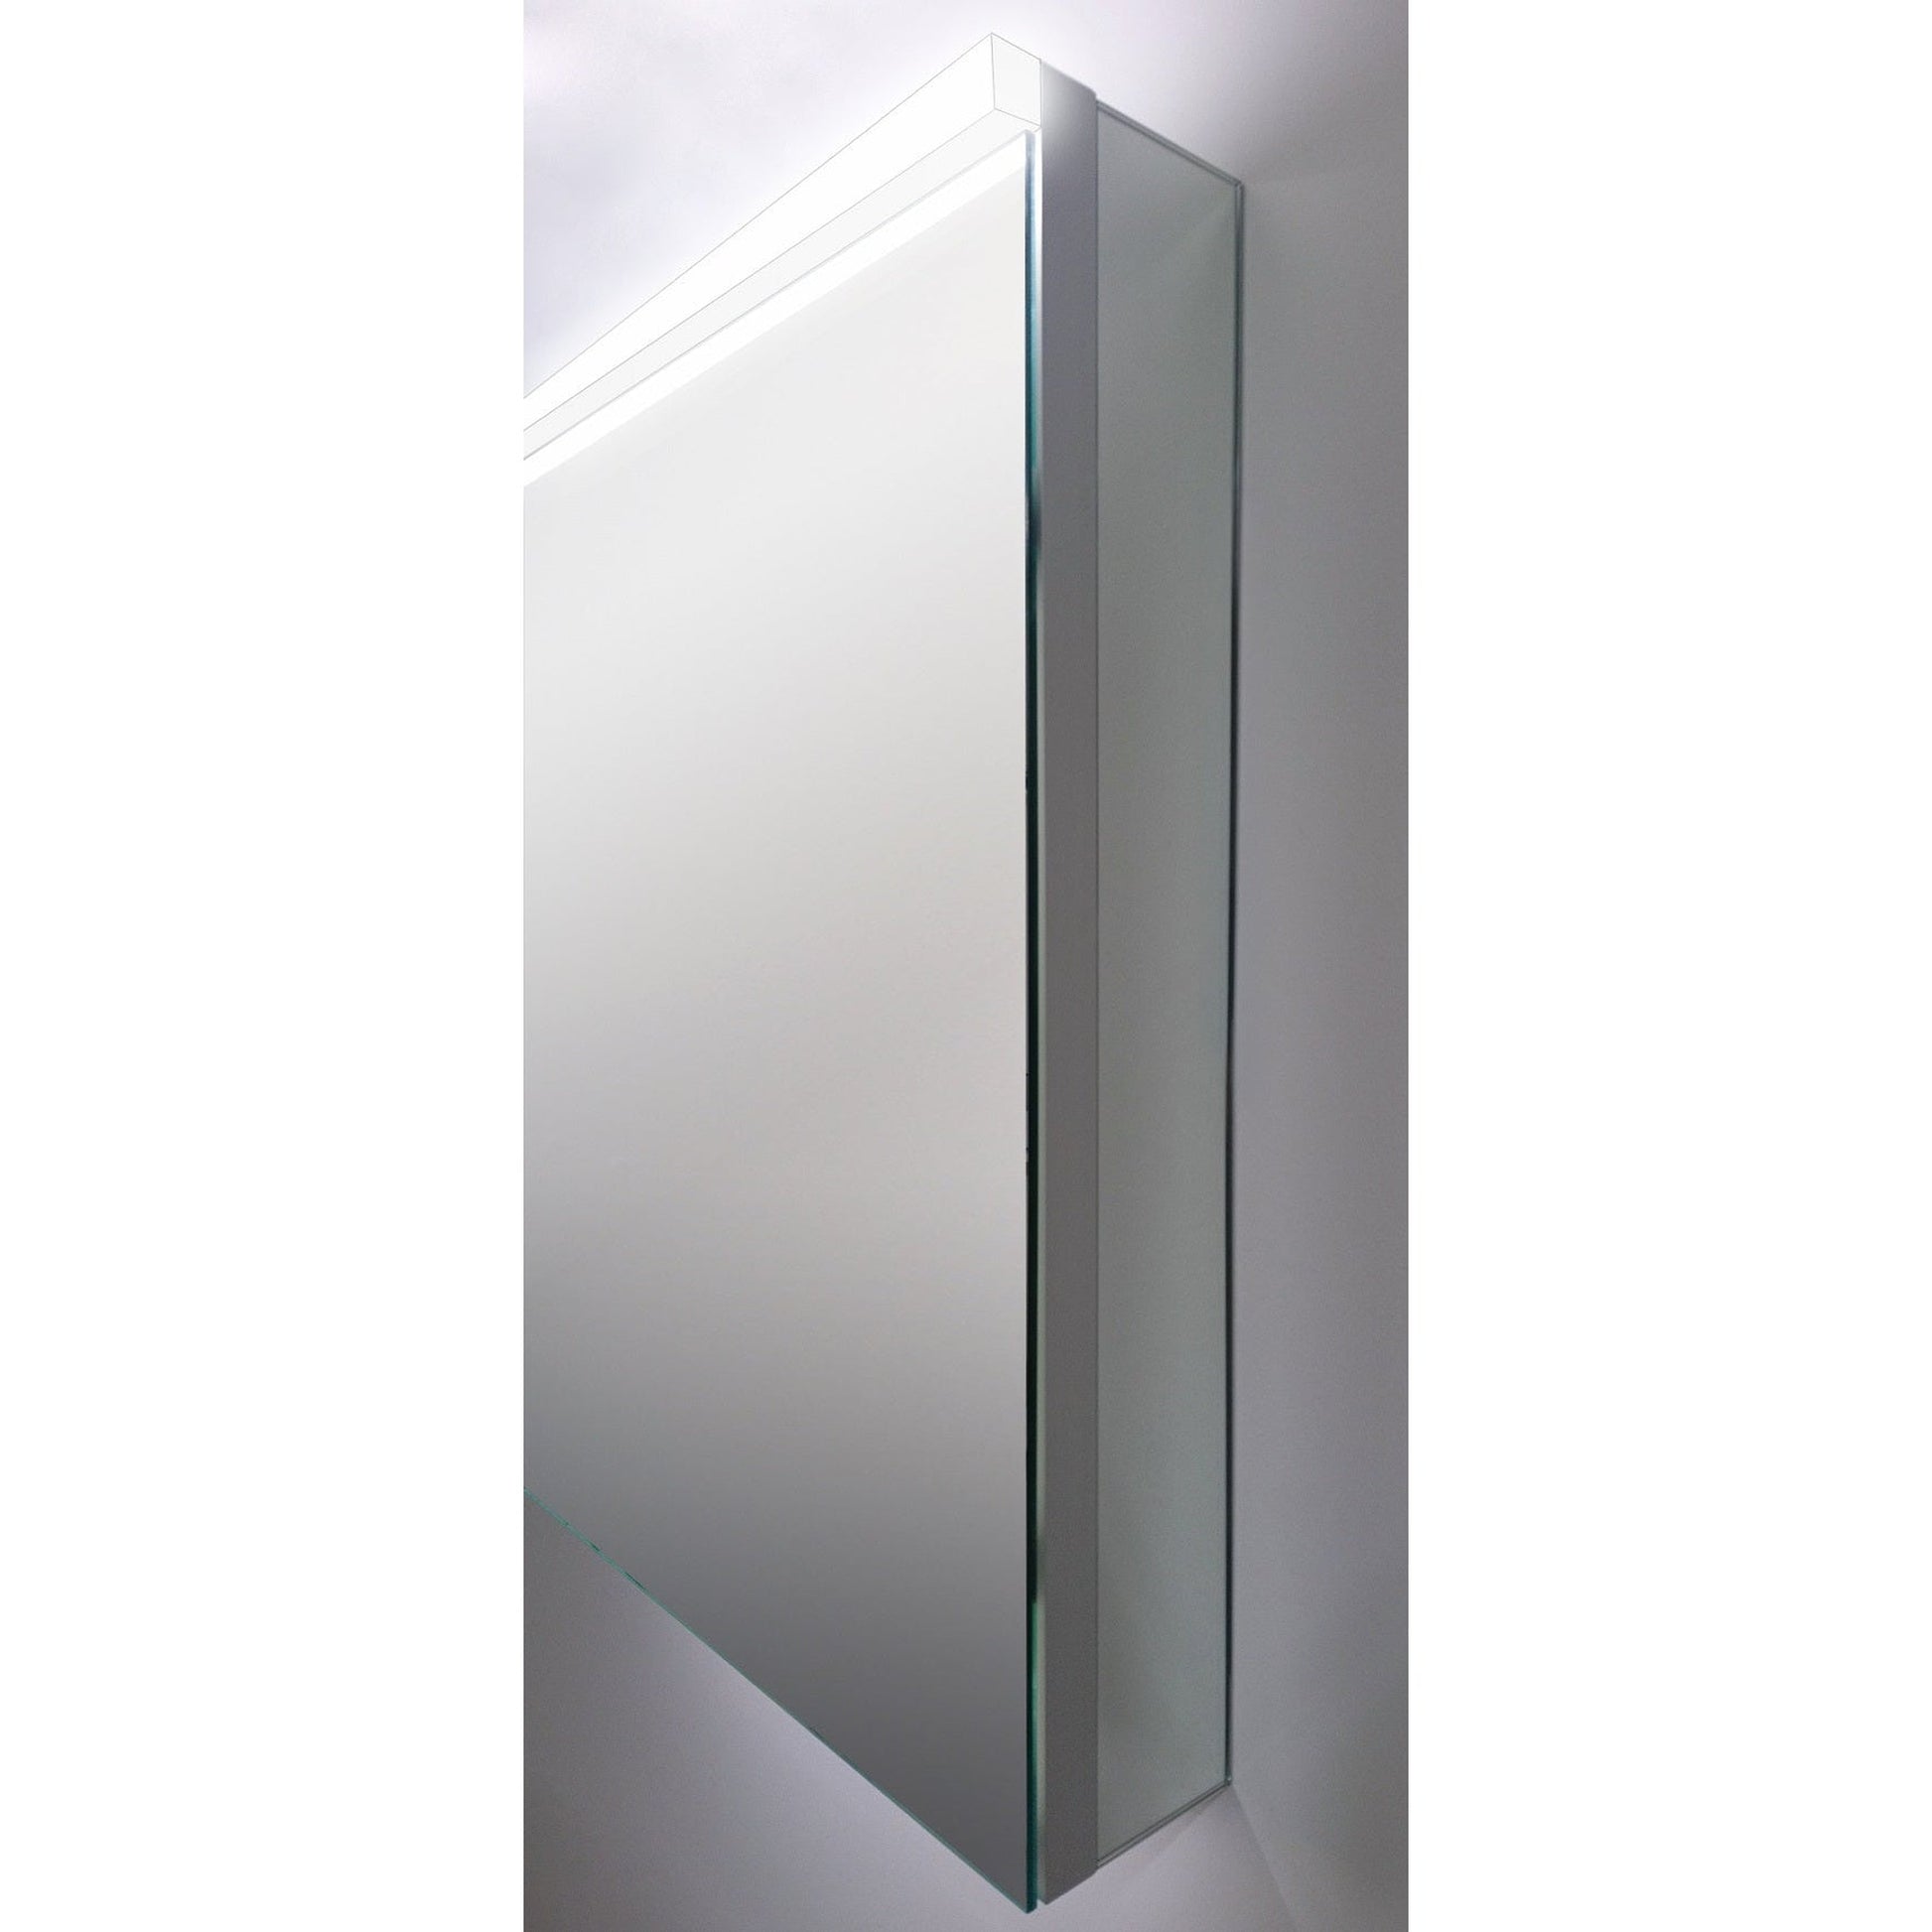 Sidler Xamo 24" x 30" 3000K Single Mirror Right Hinged Door Medicine Cabinet With Built-in GFCI outlet and Night Light Function